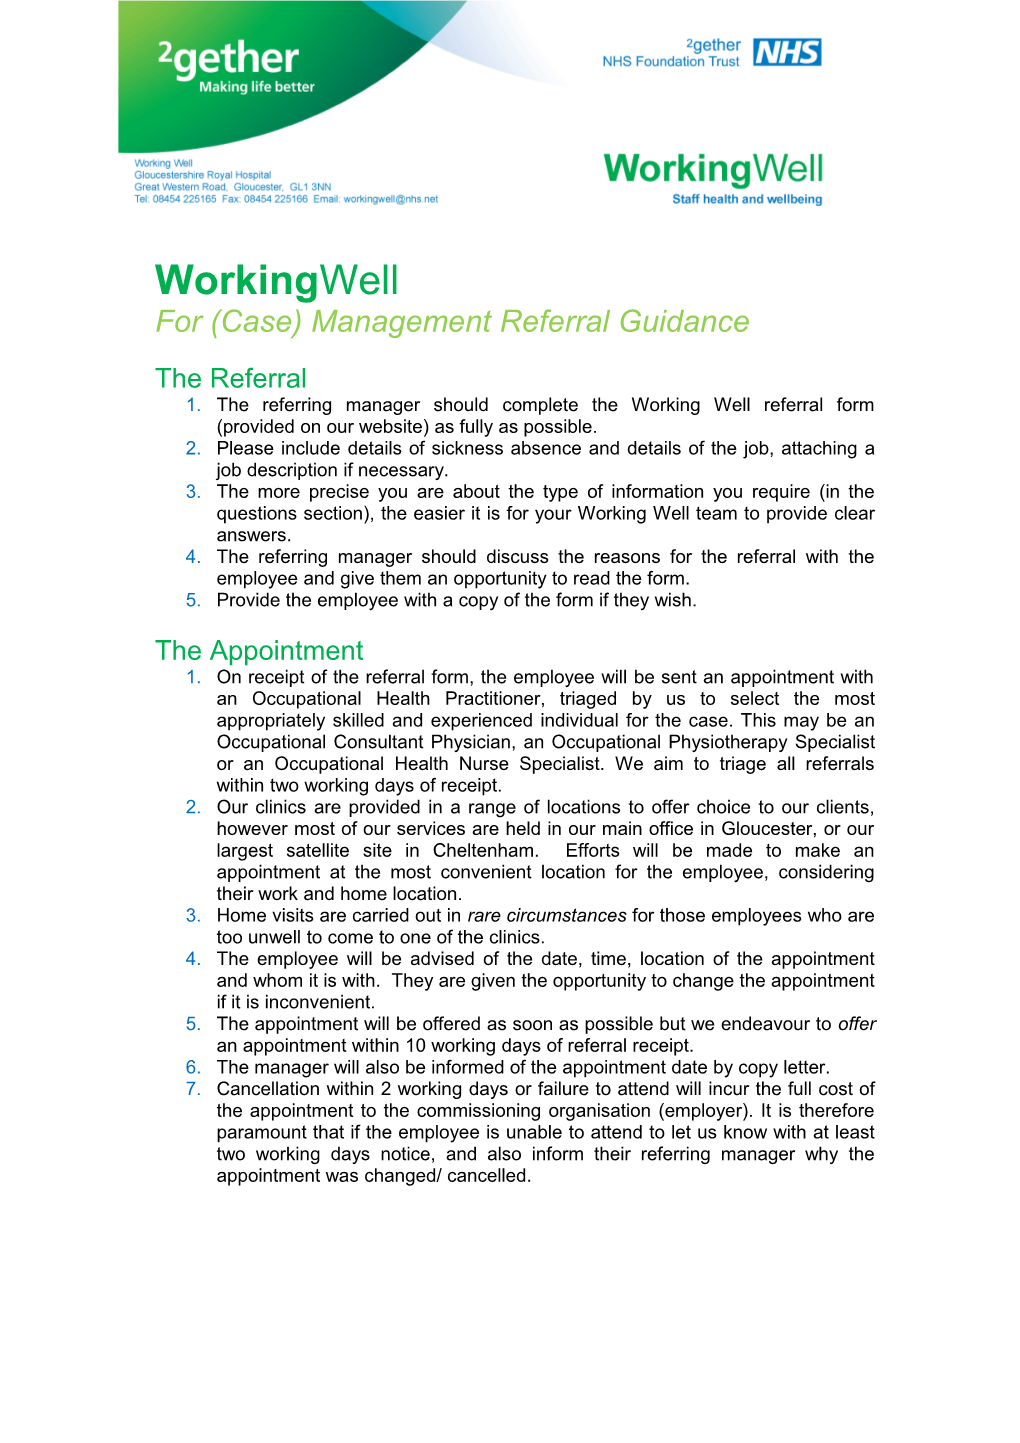 Guidance on Management Referrals for Advice from Occupational Health